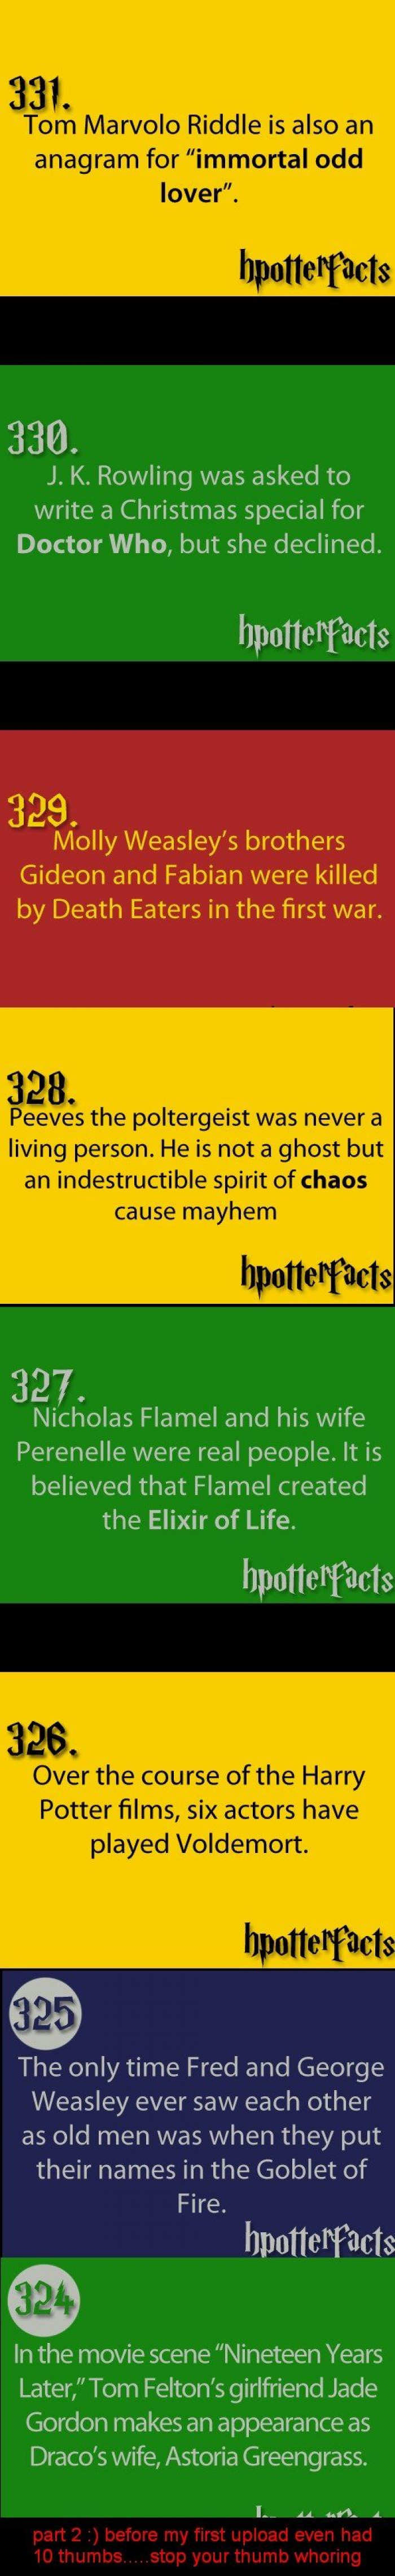 8 Harry Potter Facts That Will Make You Do A Harry Potter Marathon This Weekend